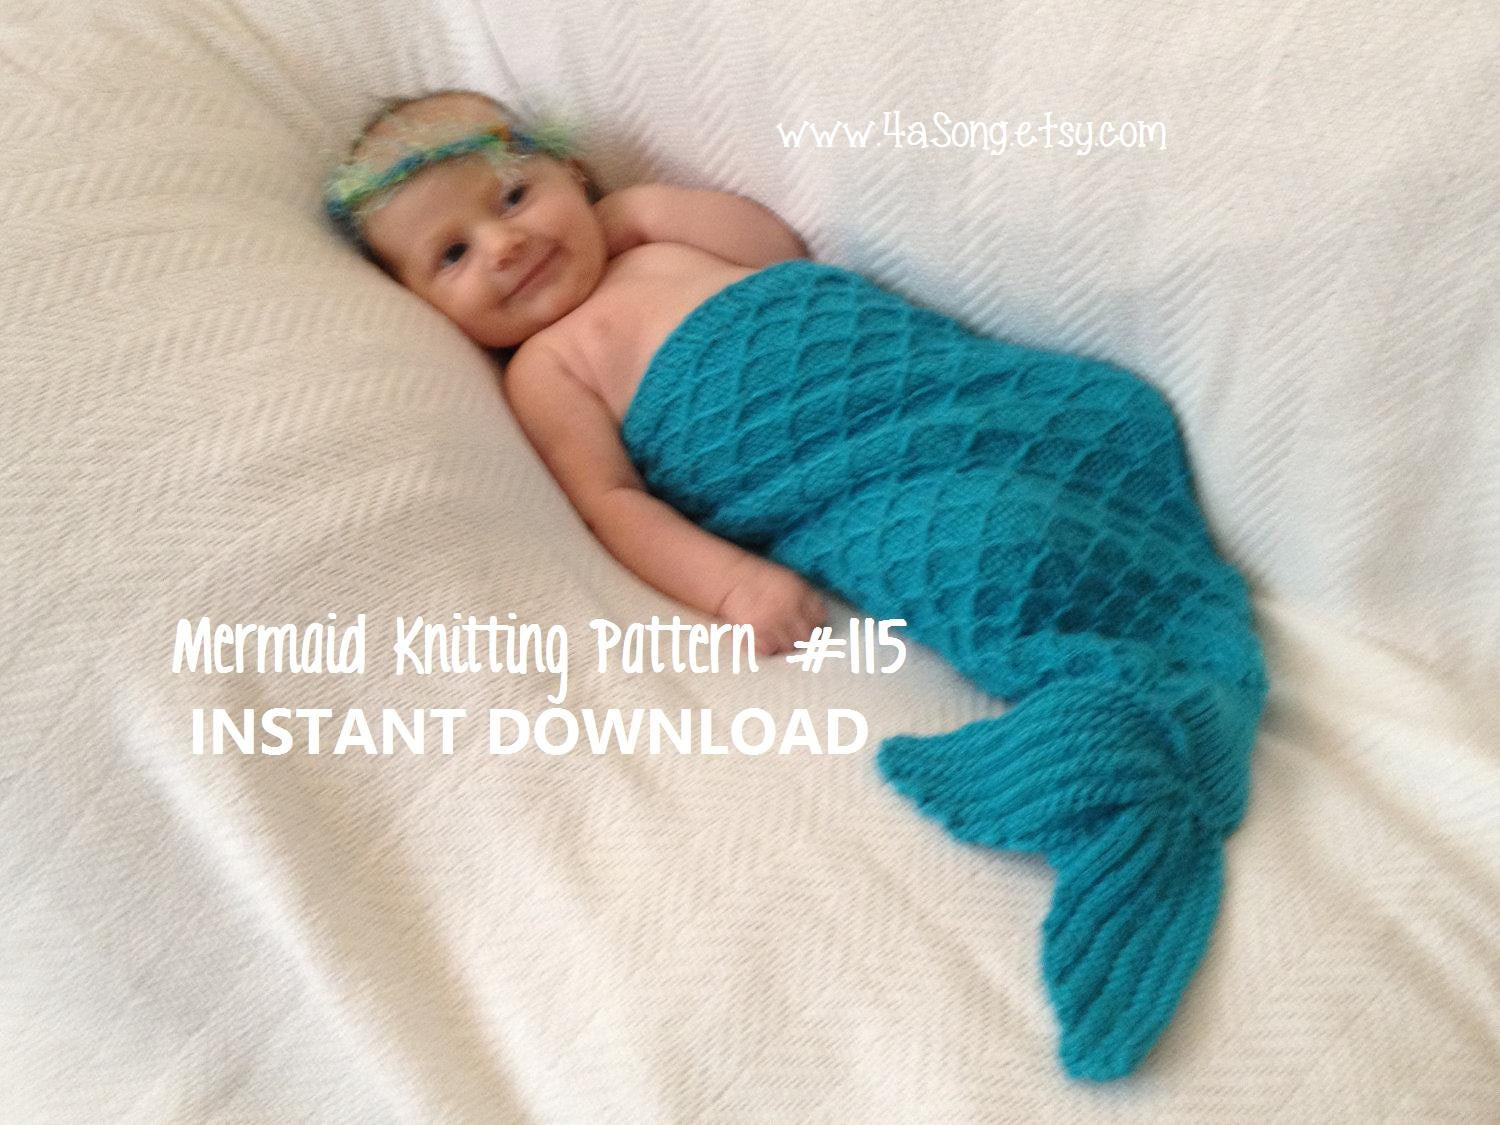 Mermaid Cocoon Knitting Pattern Mermaid Tail Cocoon Knitting Pattern Charming Newborn Photo Prop Pdf Number 115 Instant Download 45000 Patterns Sold